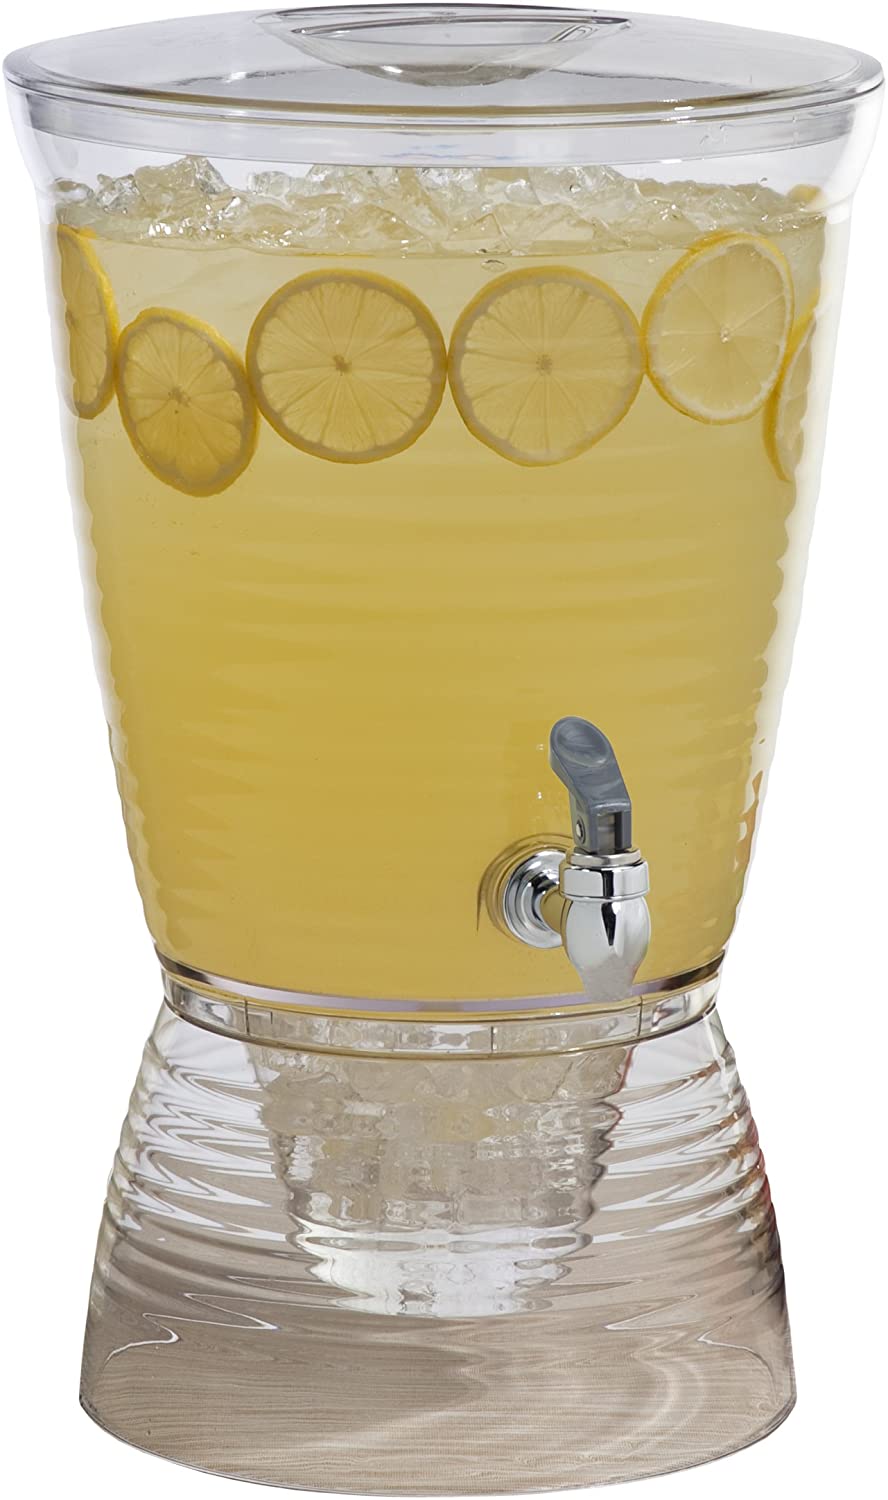 A classy drink dispenser and recipes to go with it… Beat the heat